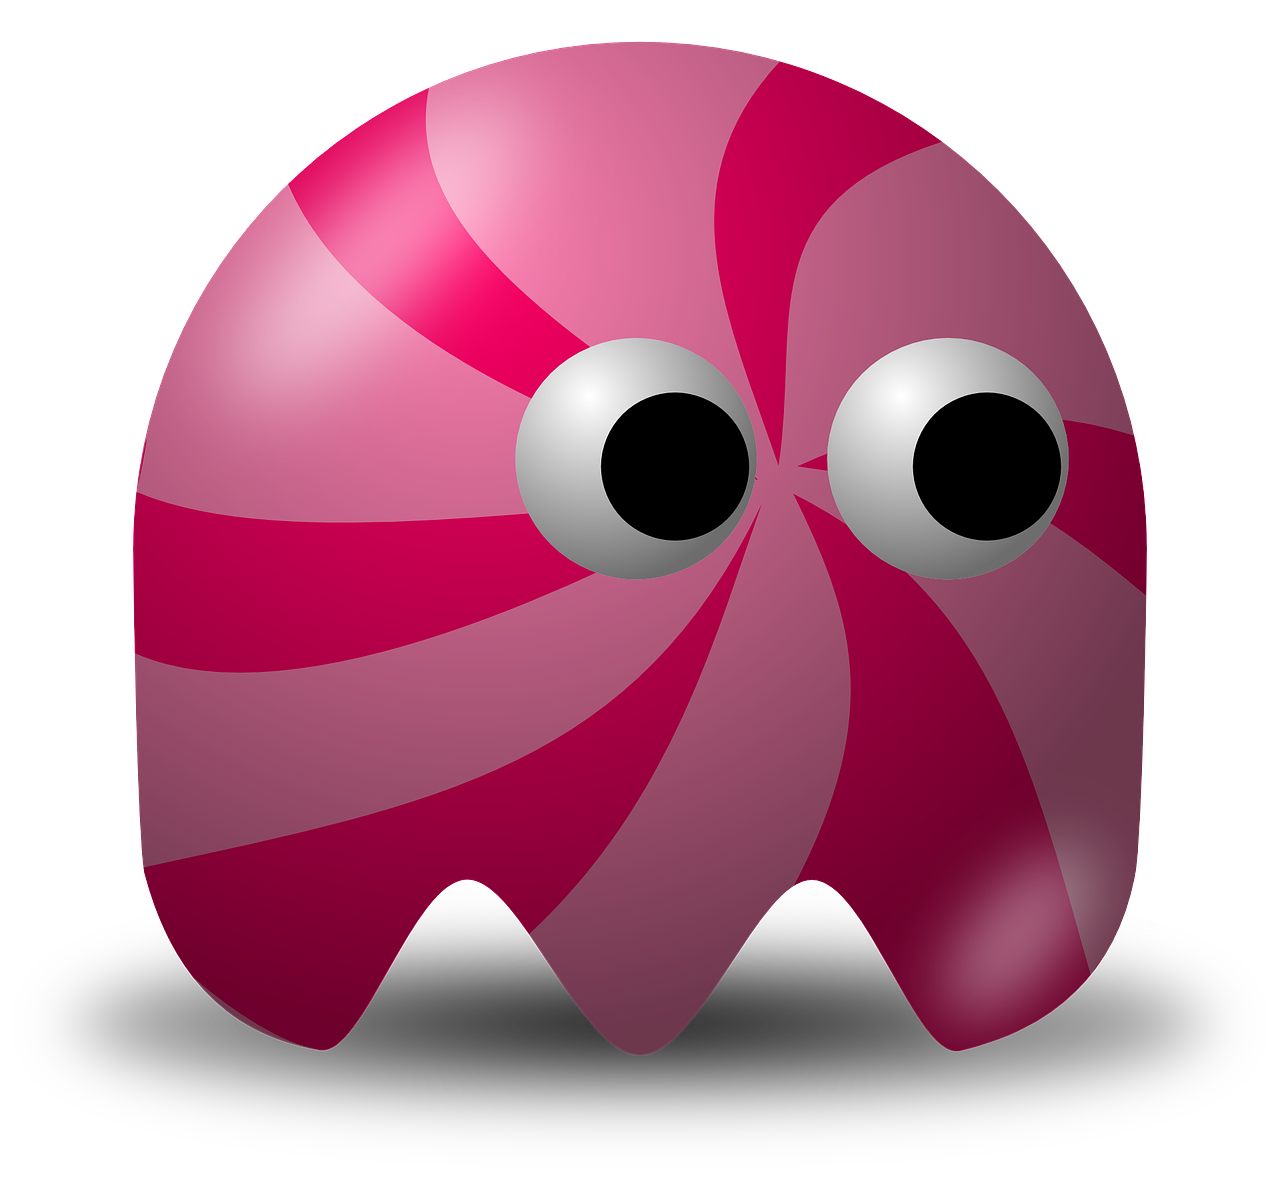 Pac-Man Pinky (Pink) Ghosts